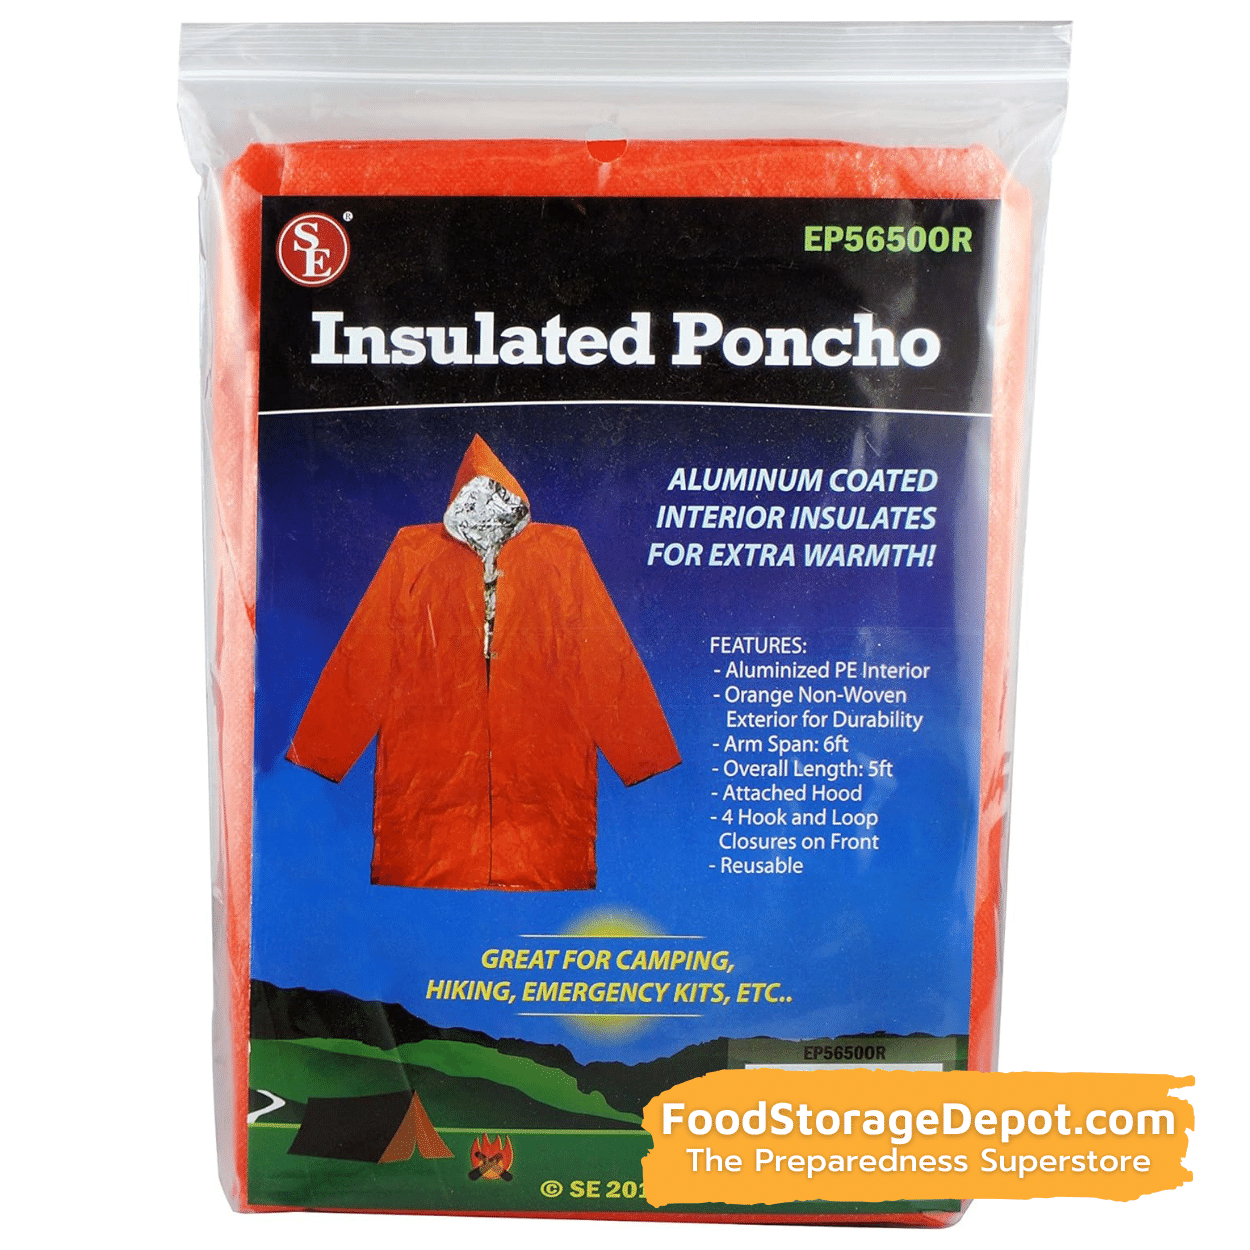 Reusable Aluminum Coated Insulated Poncho (5 Foot Length)